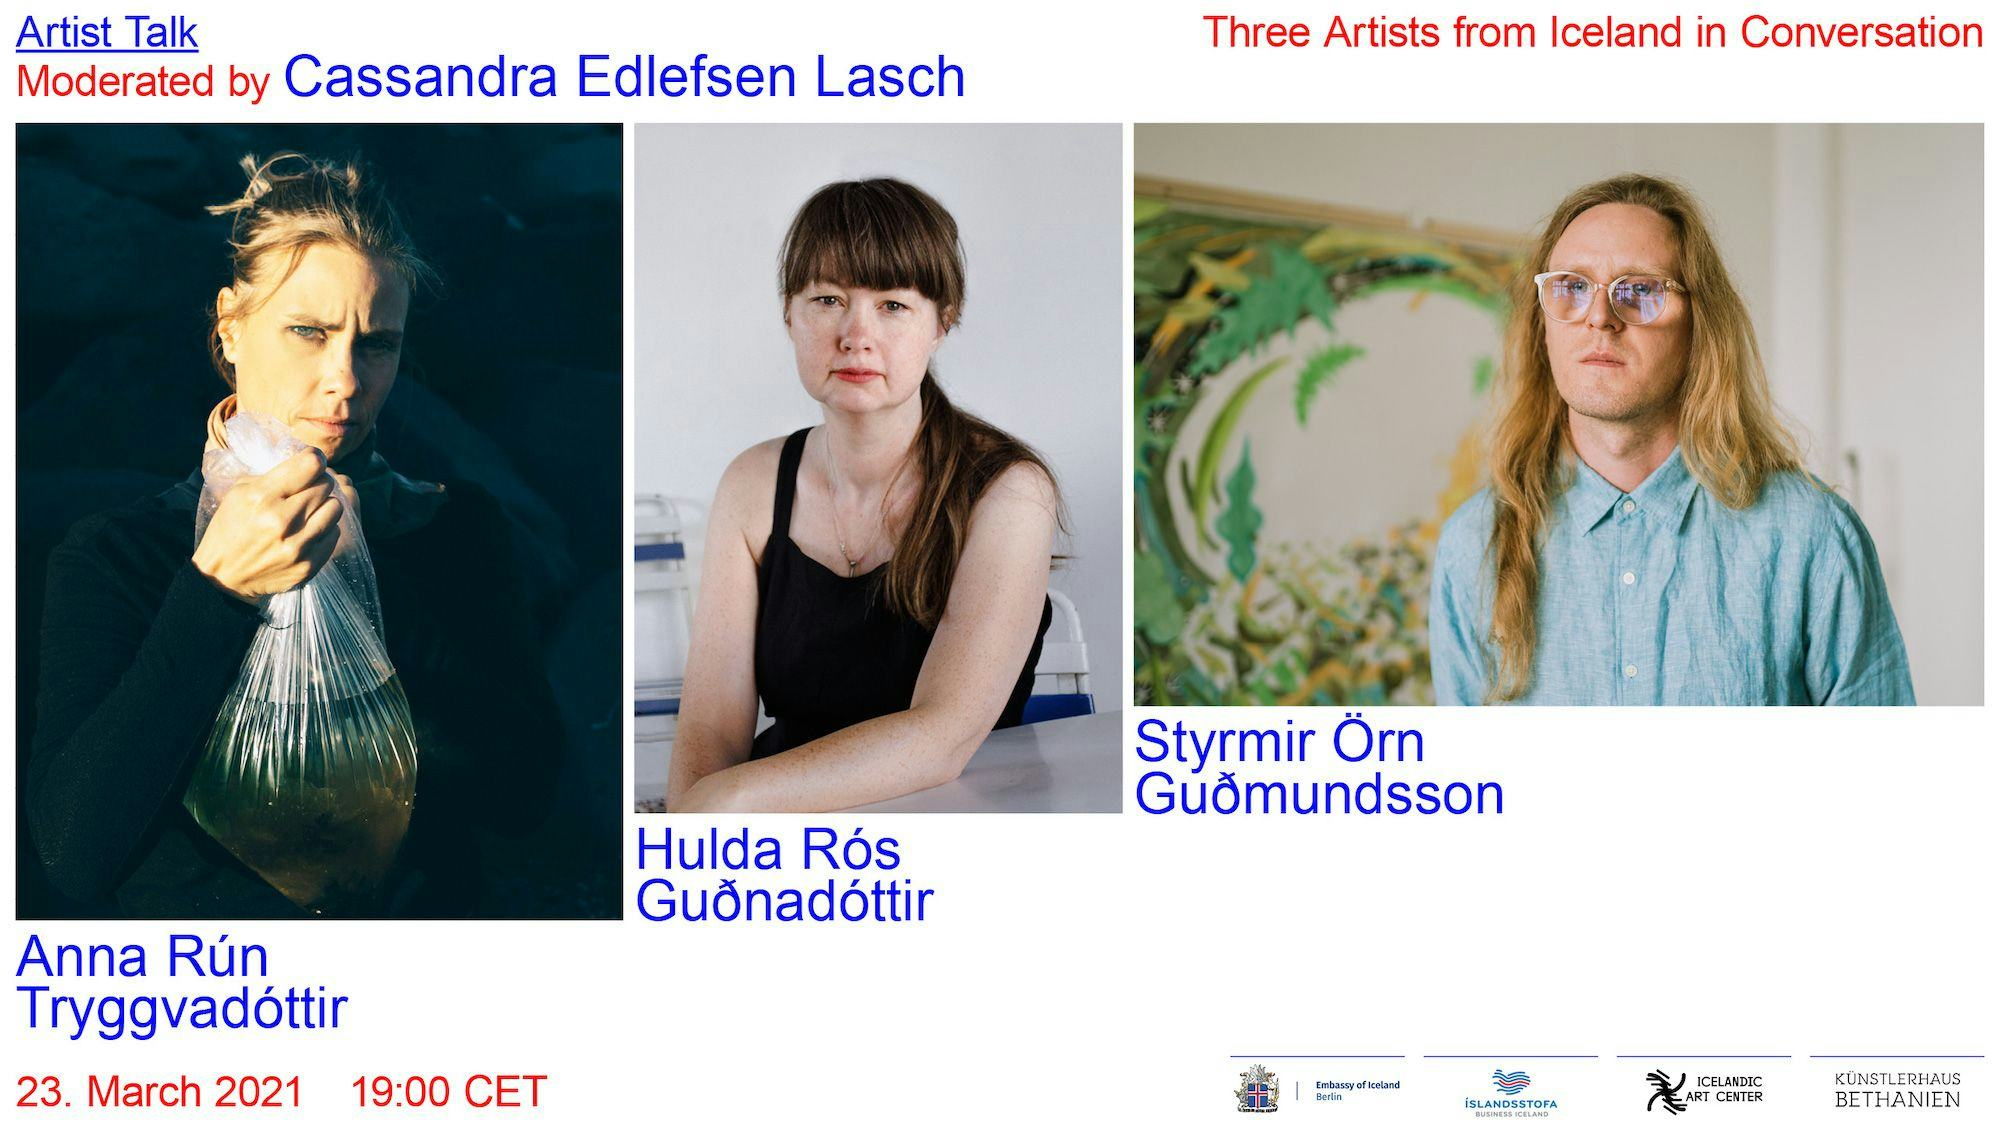 Three Artists from Iceland in Conversation